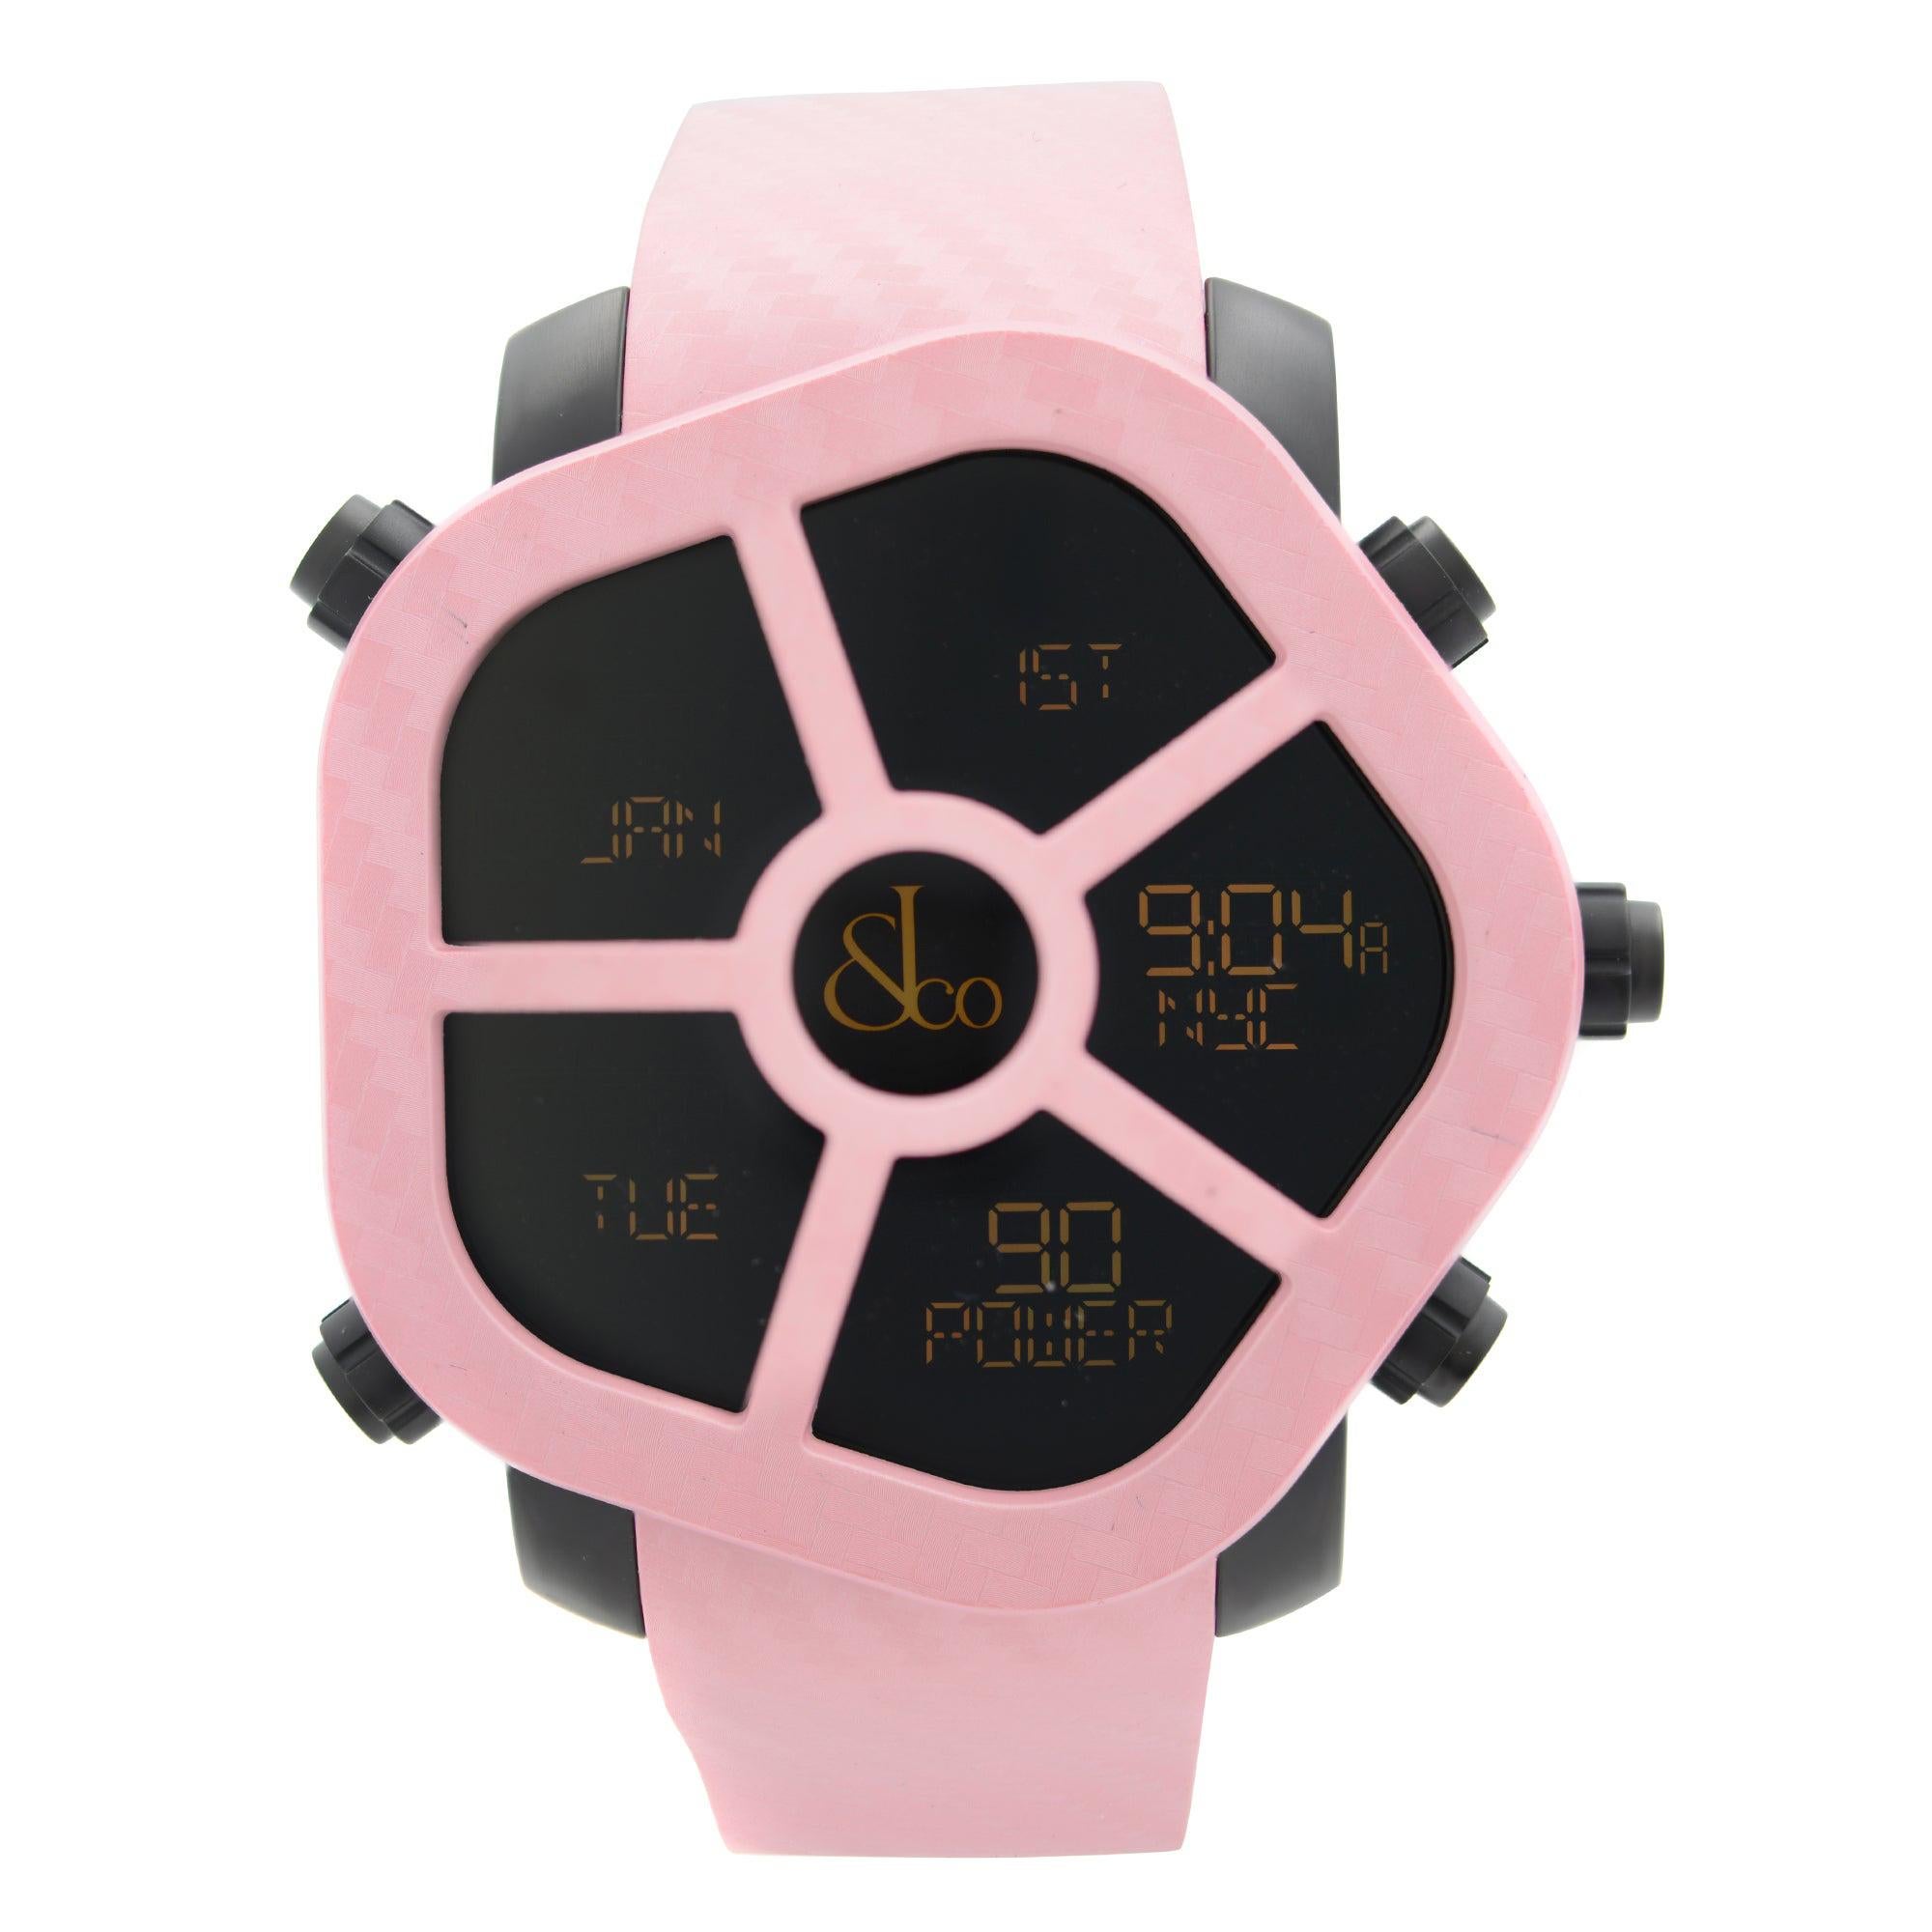 Jacob & Co. Ghost 5 Time Zone Carbon Bezel Pink Mens Watch GH100.11.NS.MC.ANK4D For Sale